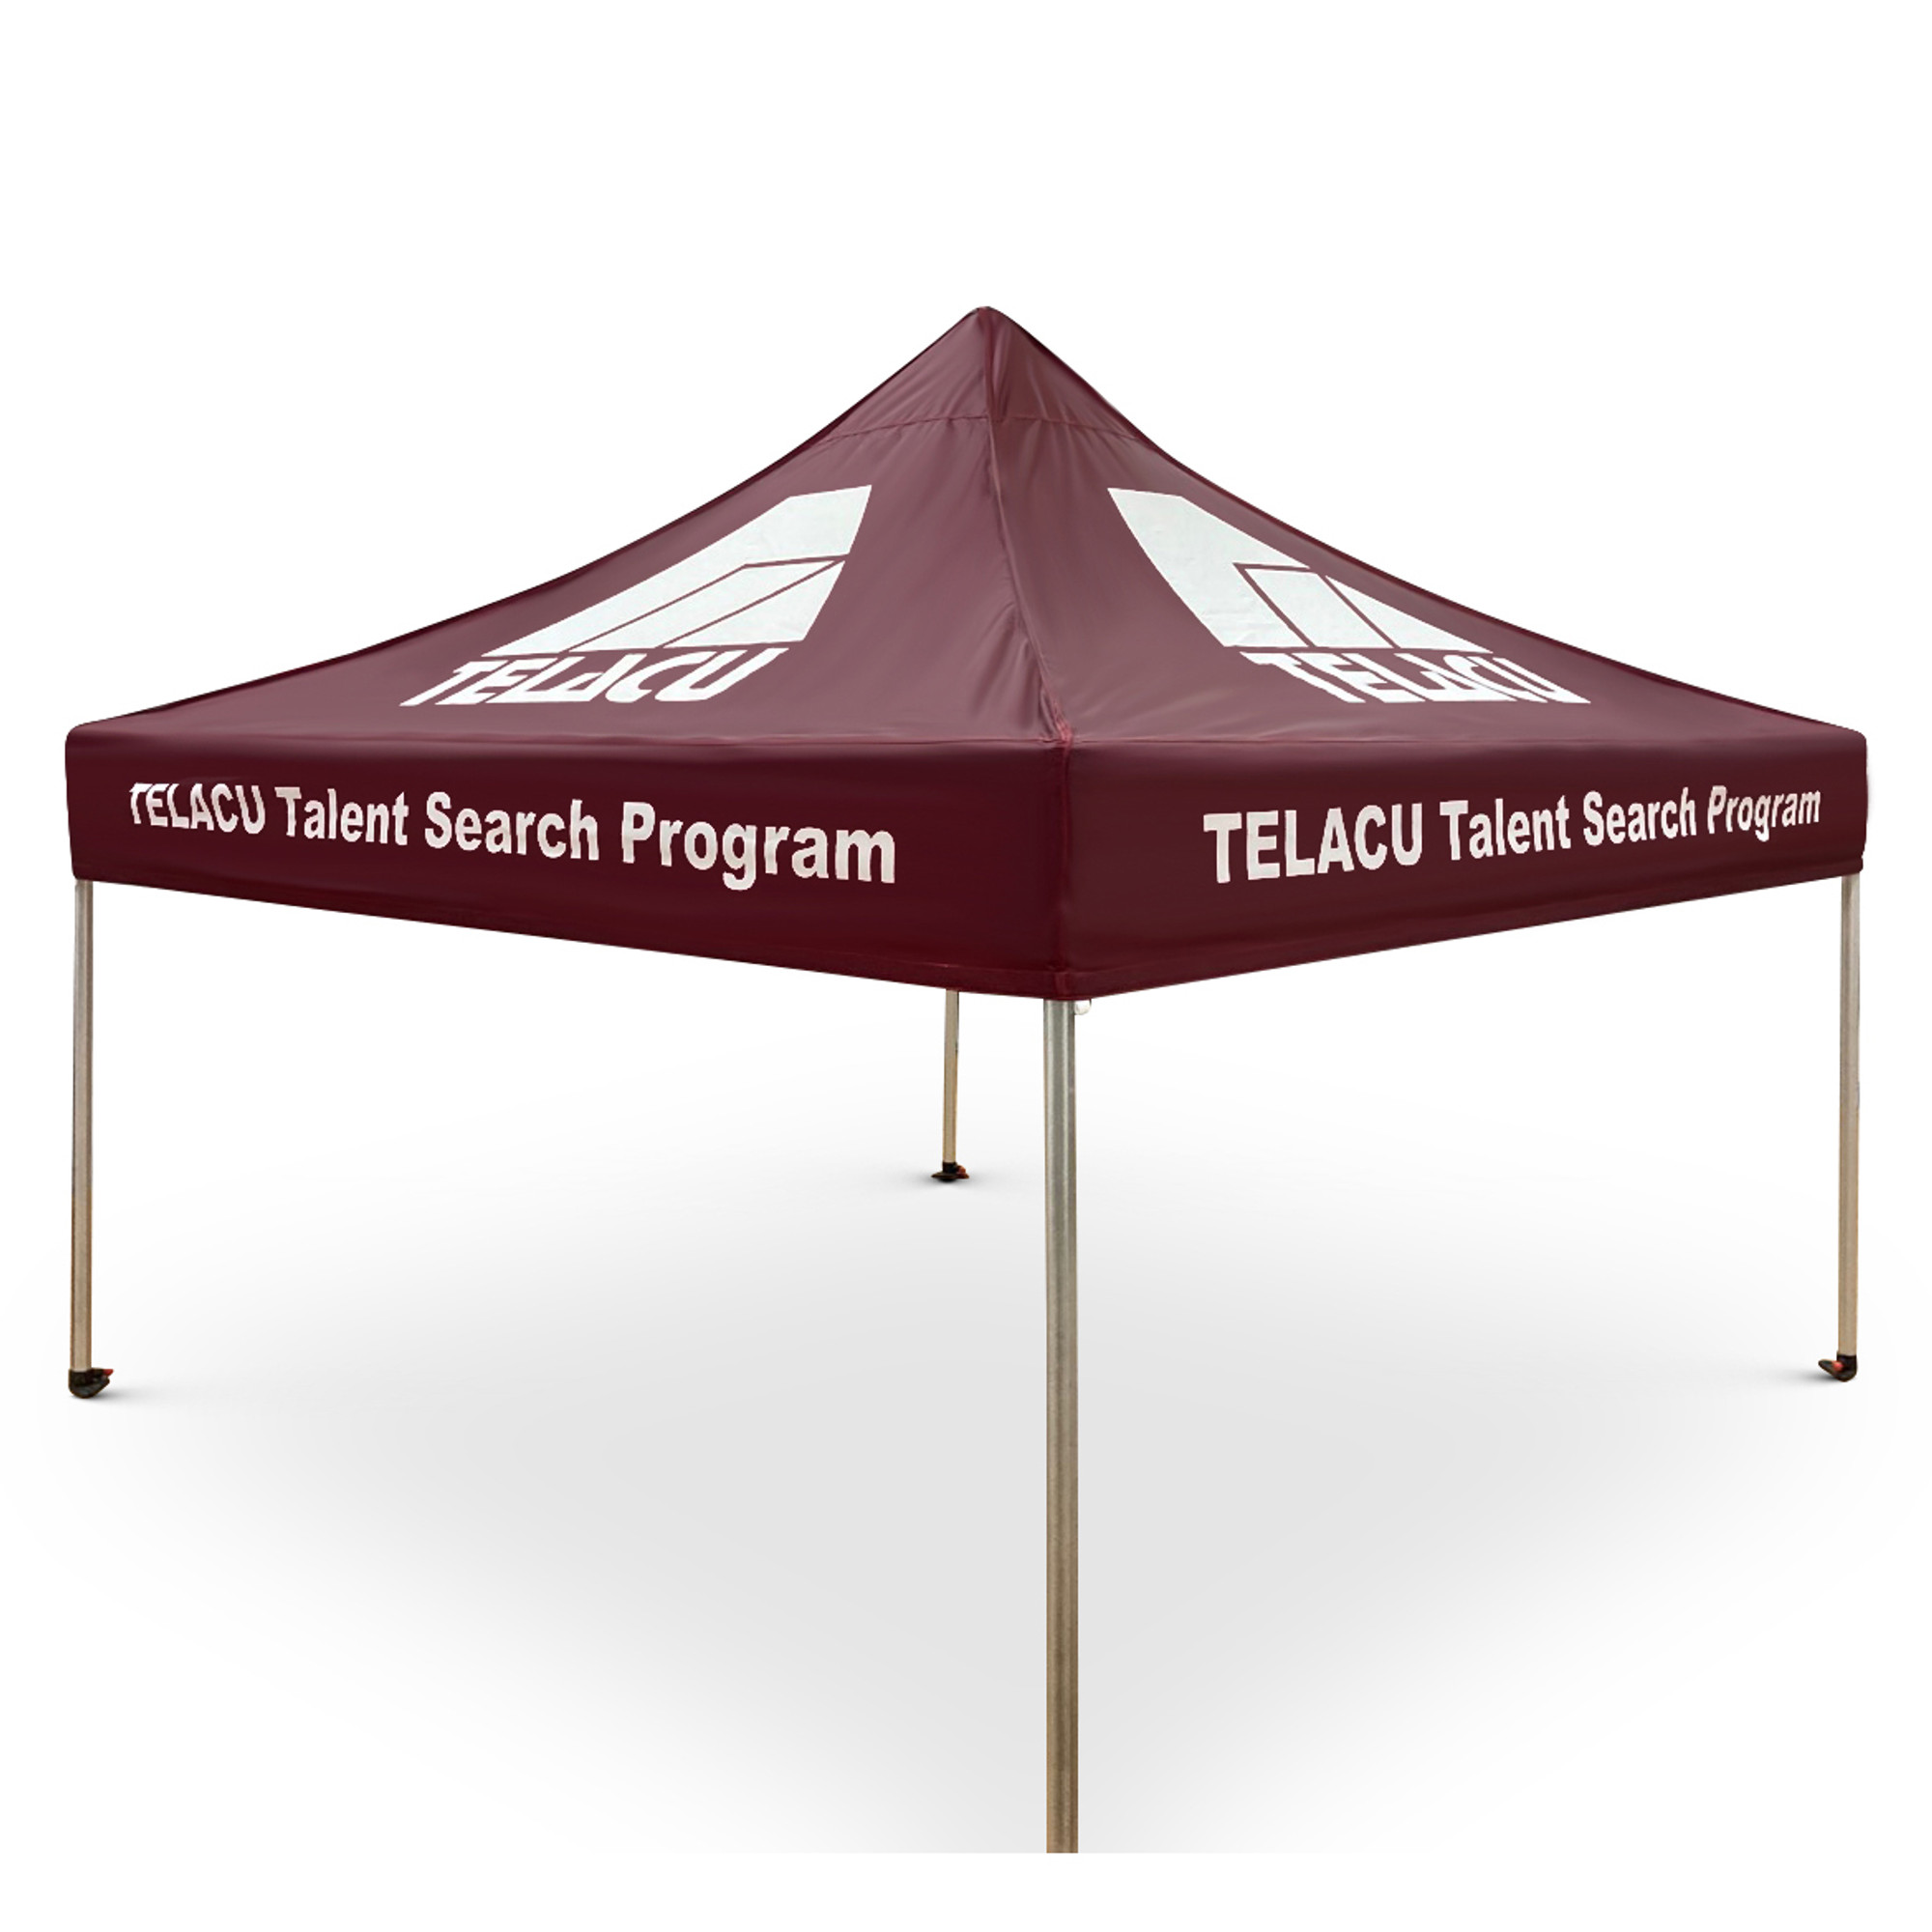 Design your own 10x10 Tent Cover. Add your logo, colors and info.